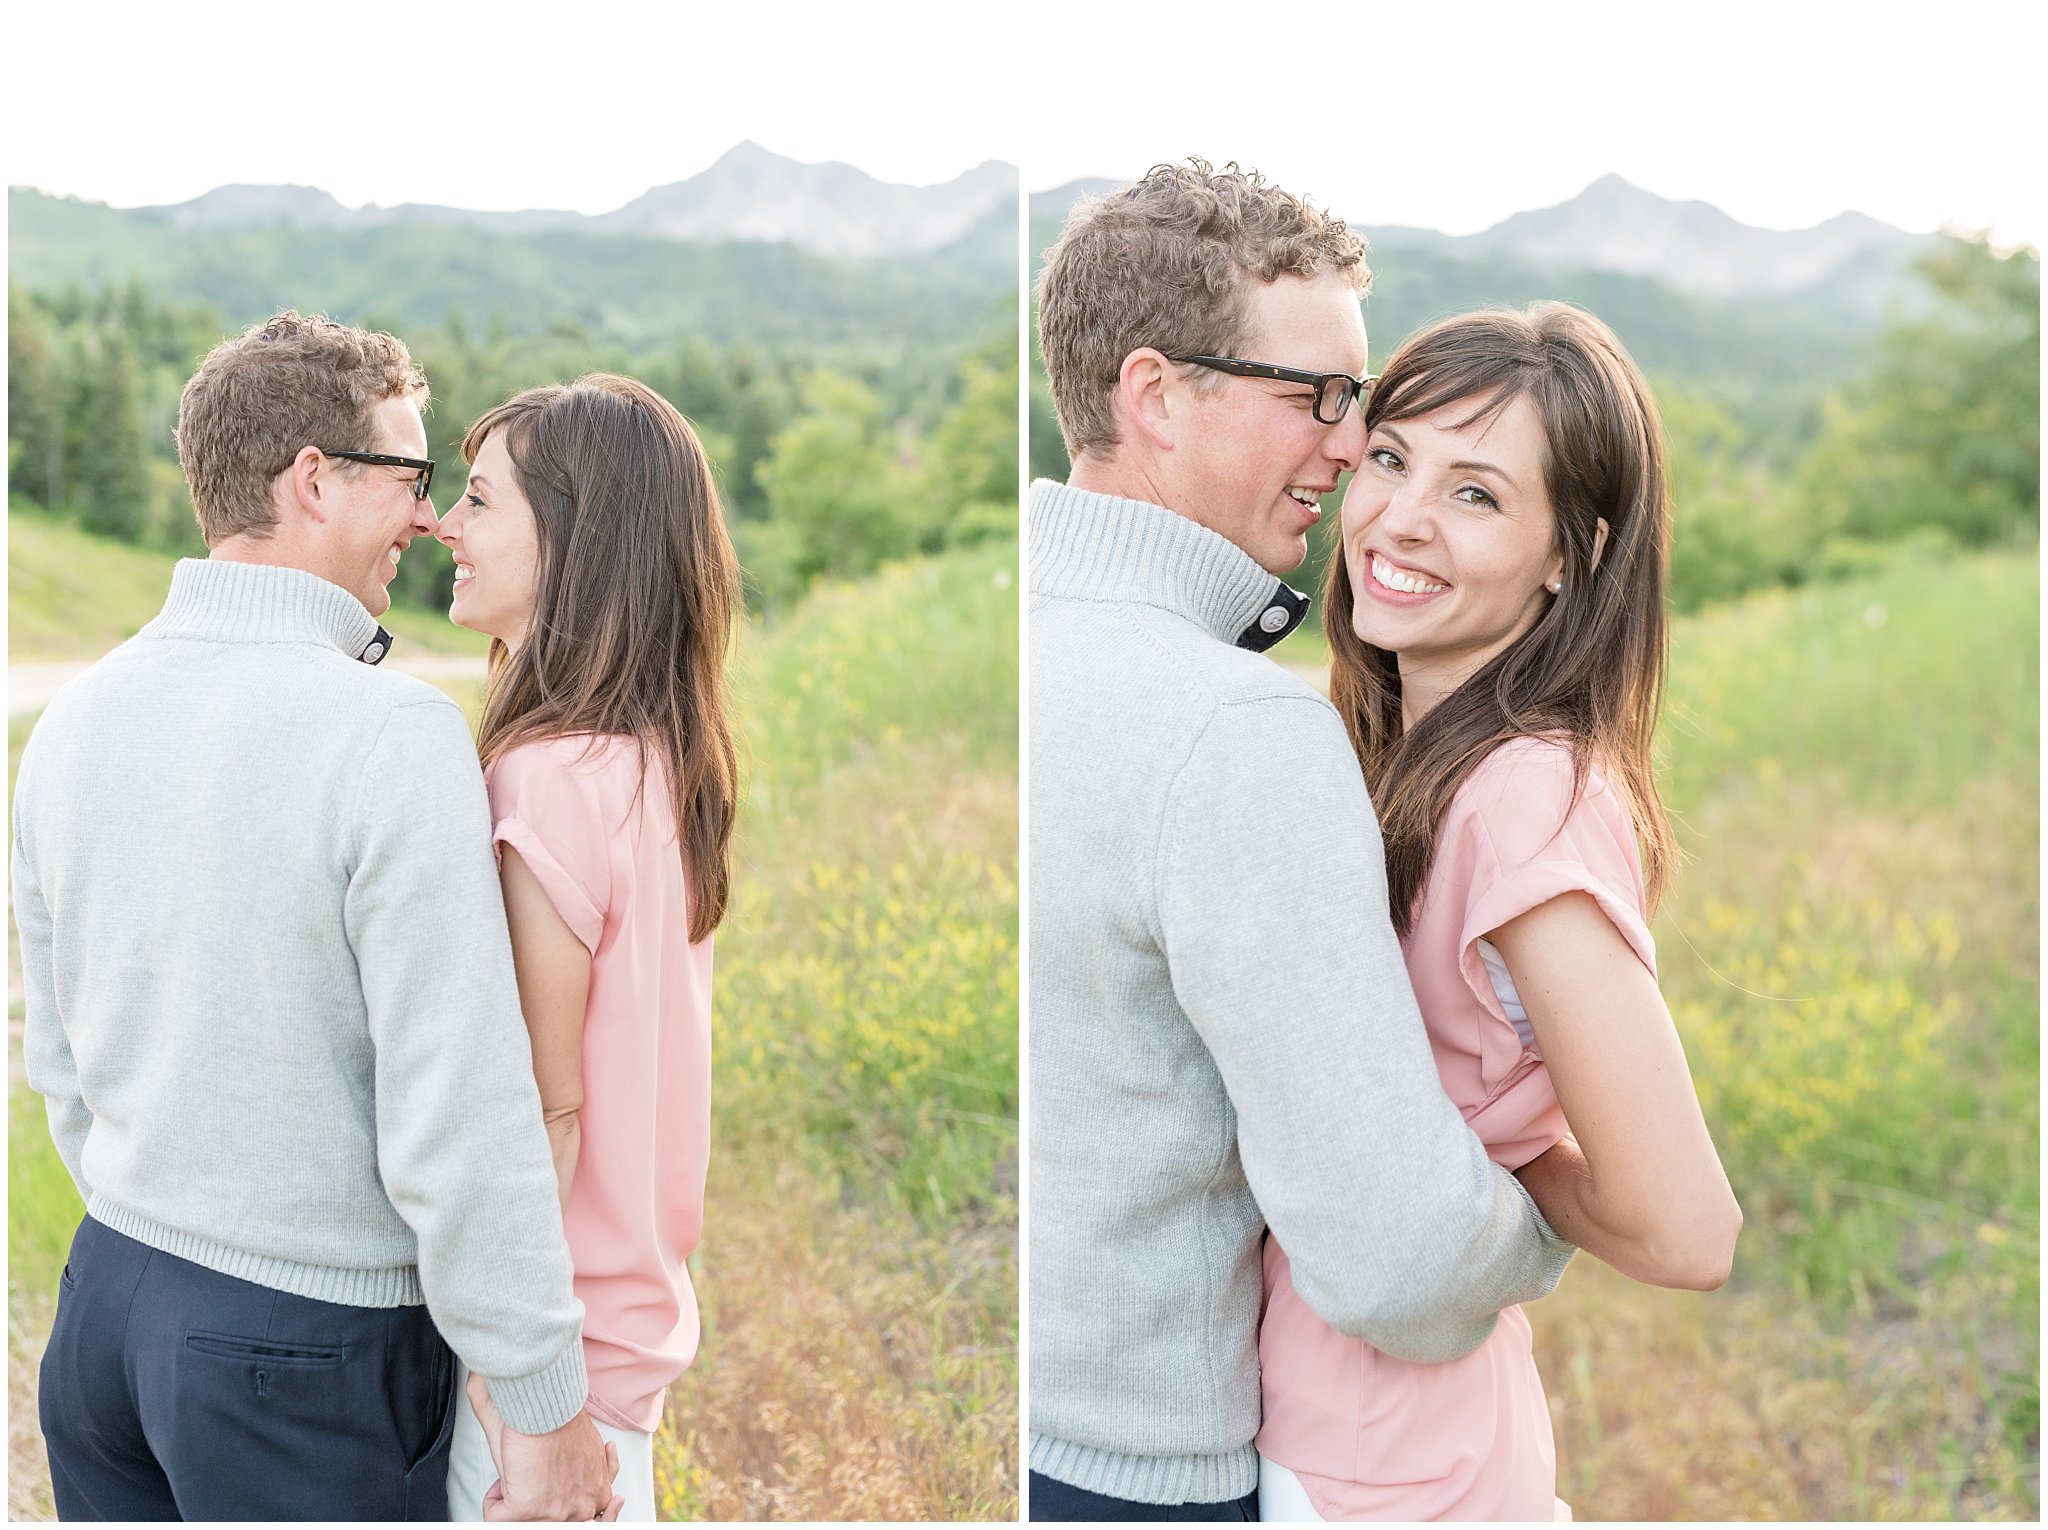 Joyful couple candid pictures with mountains behind them | Utah couples photography at Snowbasin